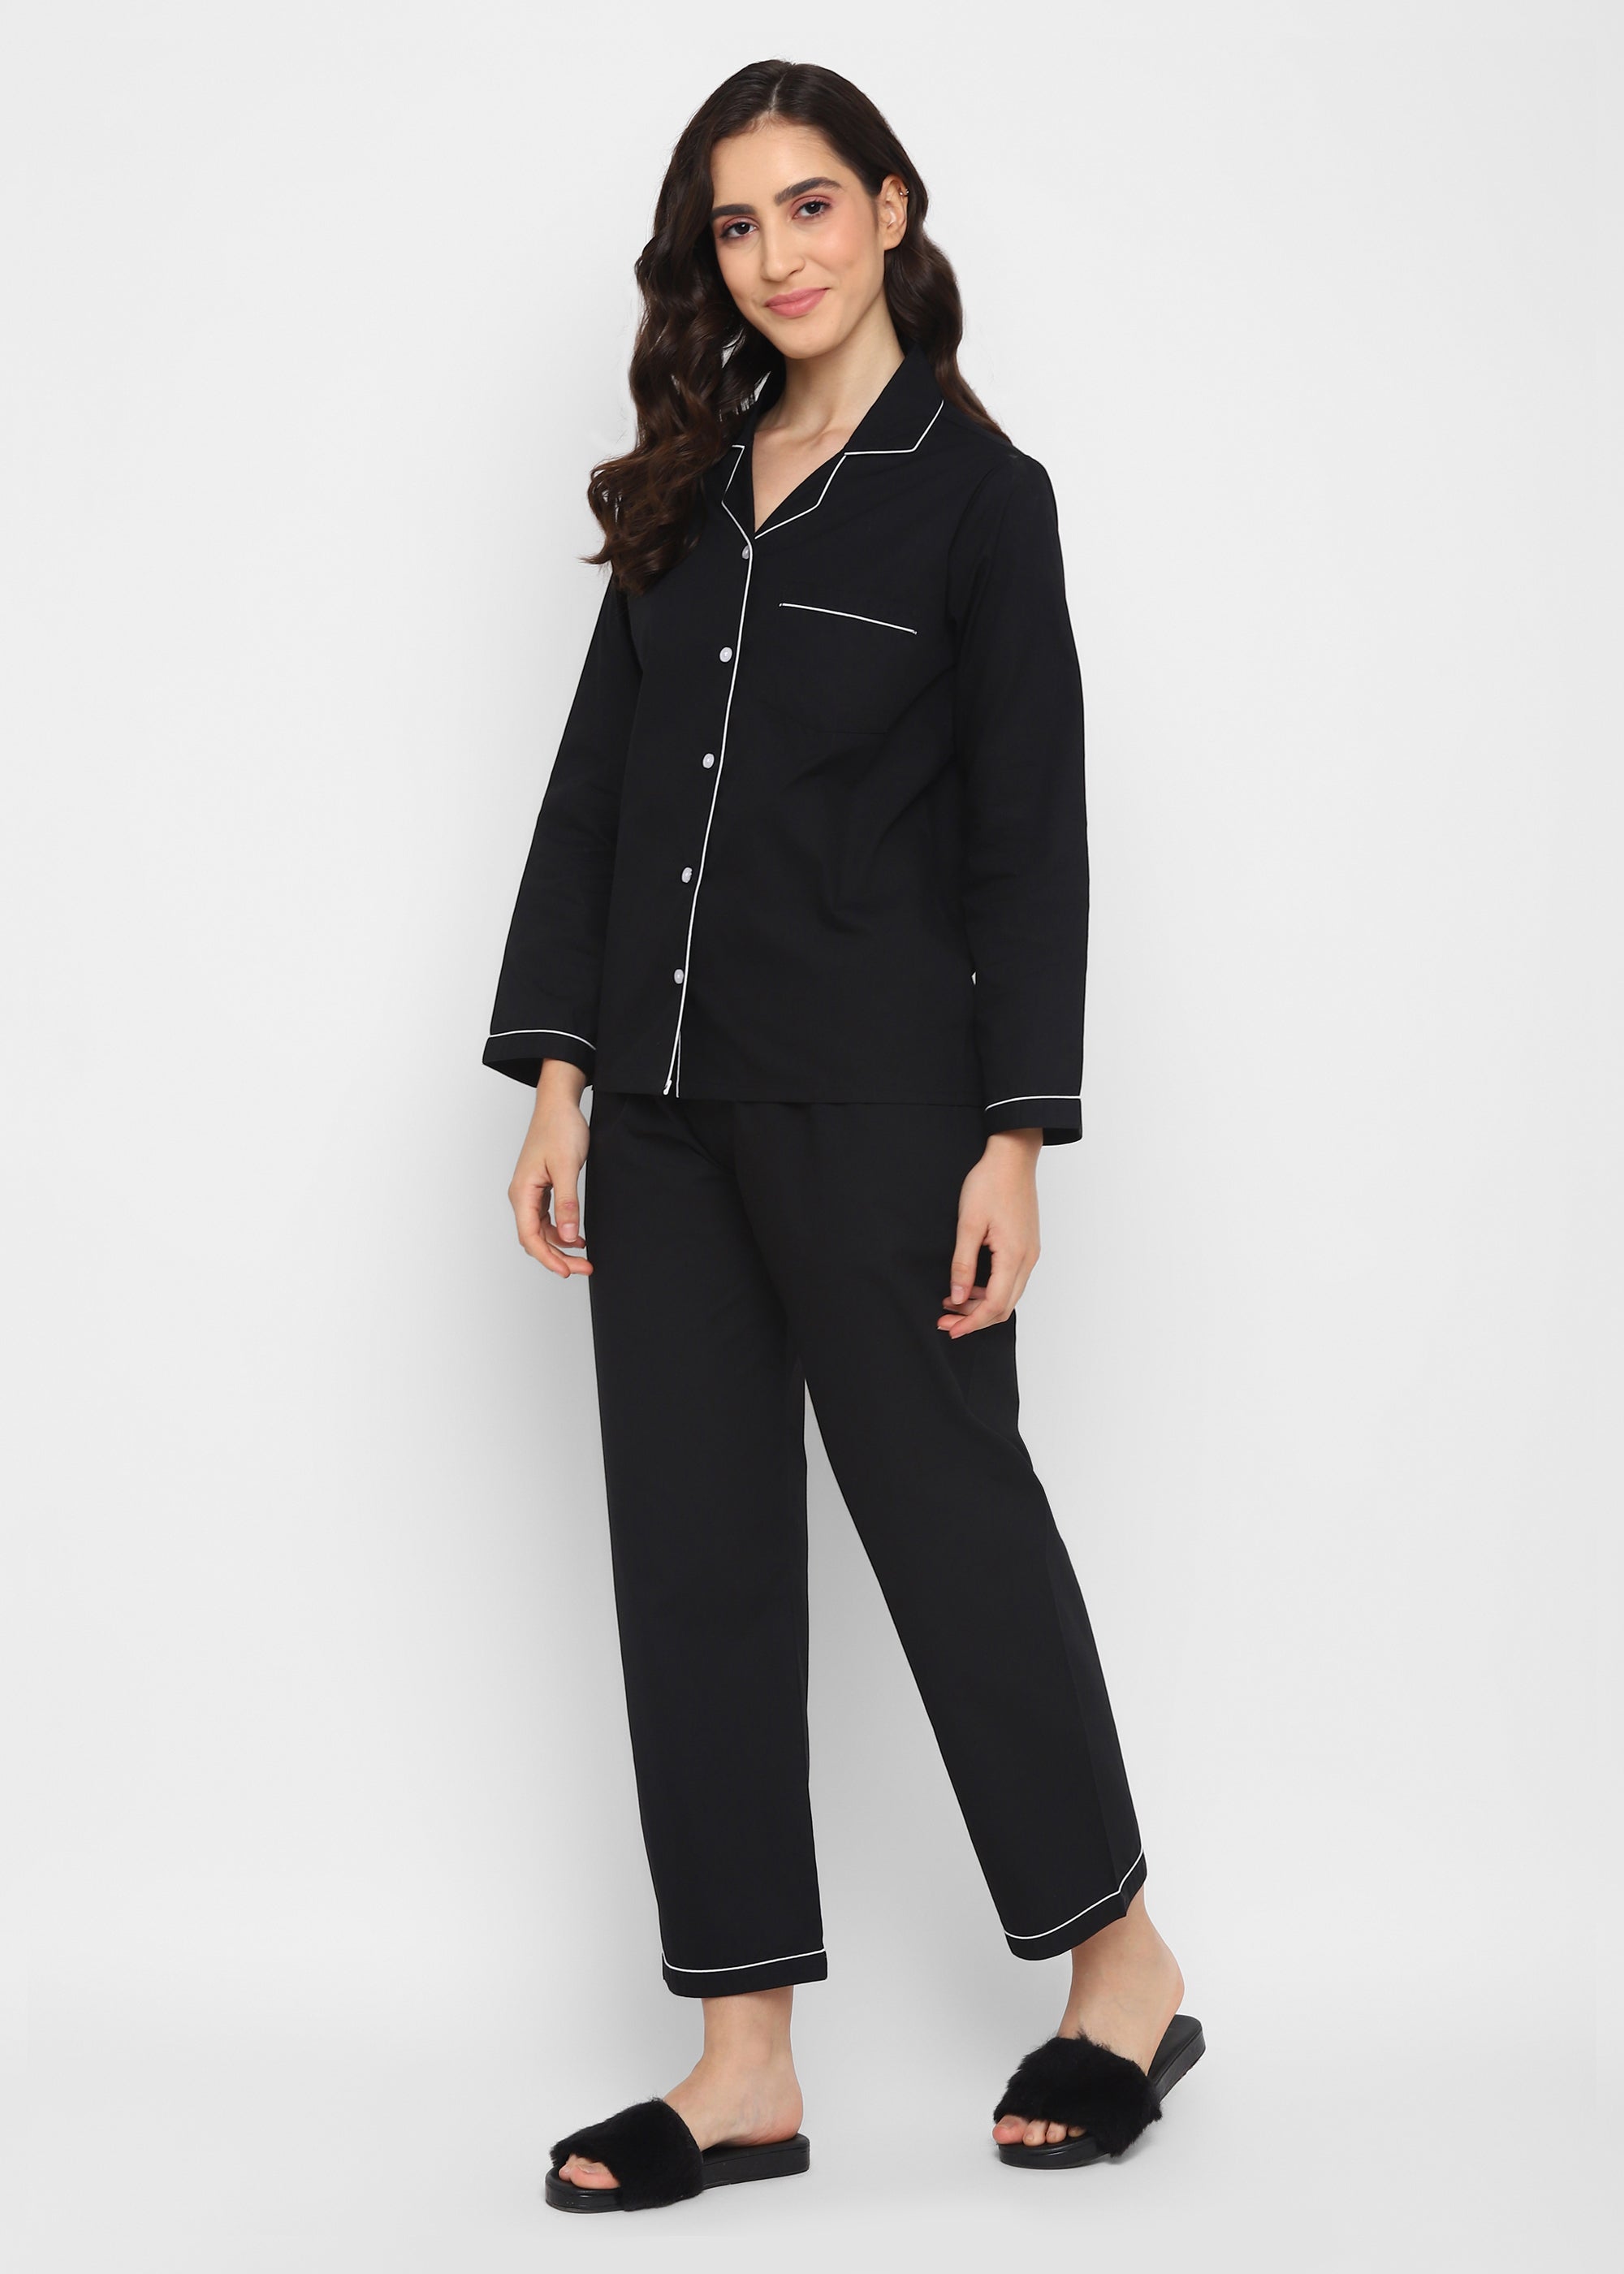 Black Cotton Poplin with White Piping Women's Night Suit